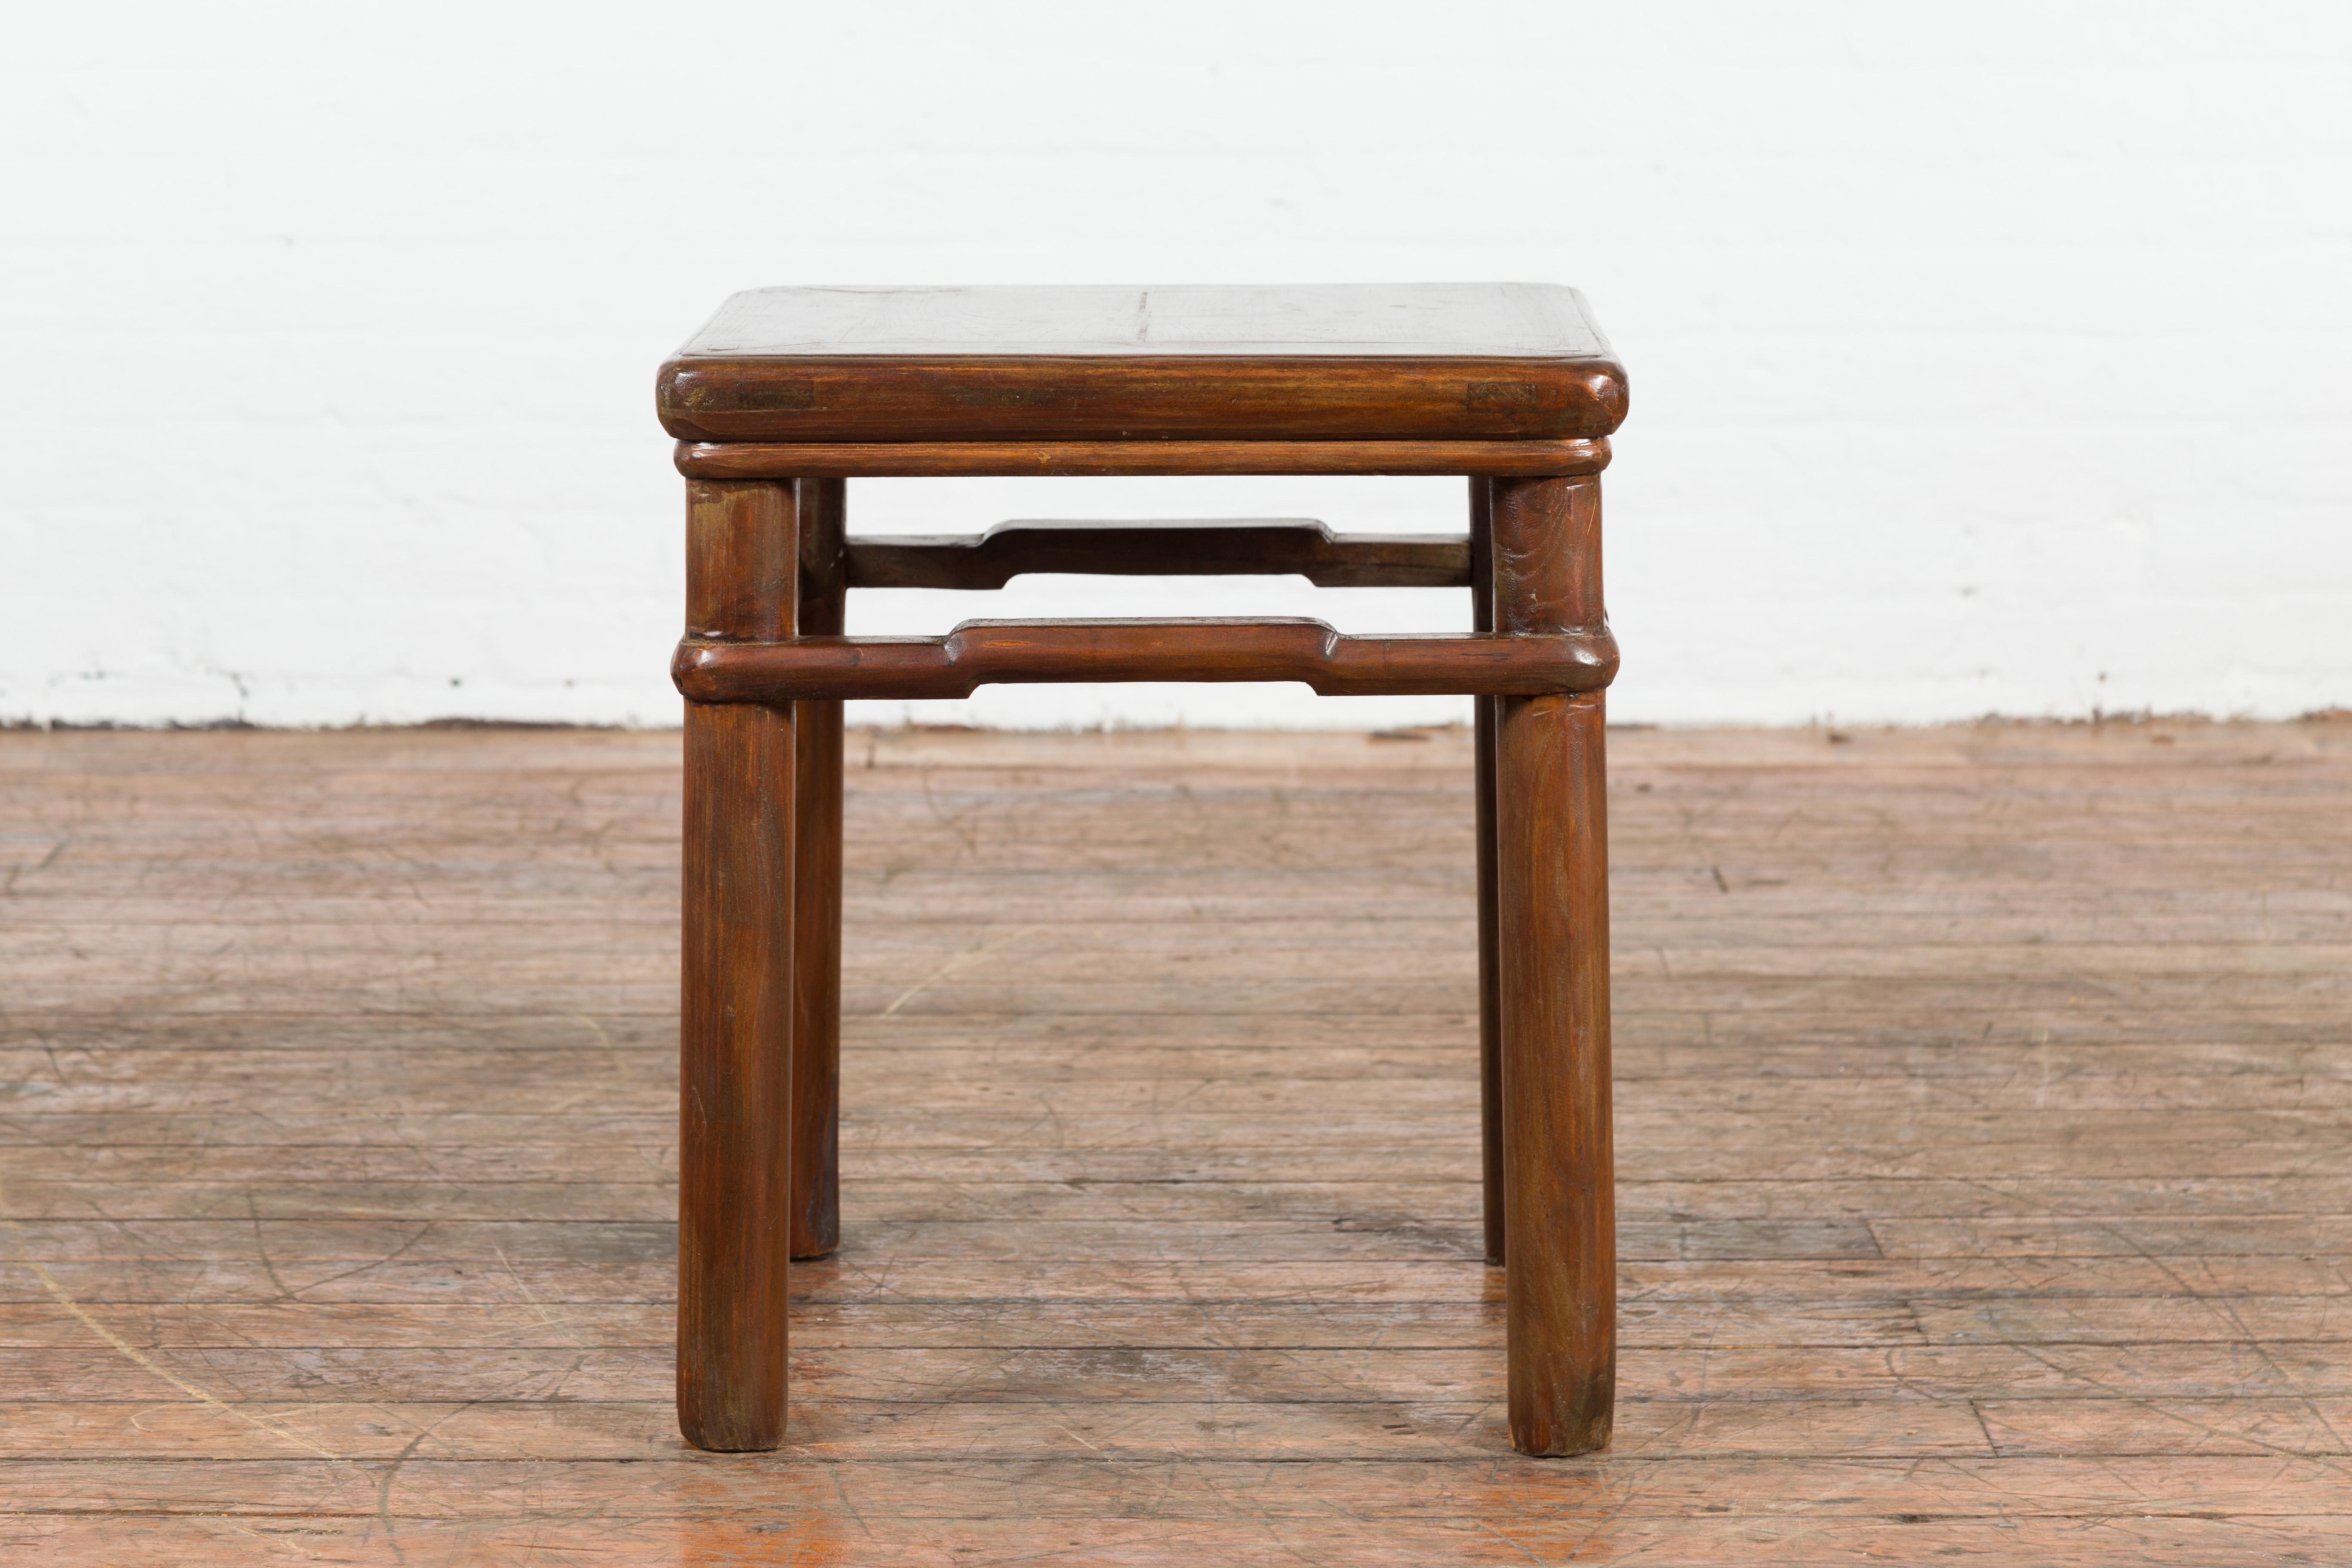 Carved Chinese Qing Dynasty Period 19th Century Side Table with Humpback Stretchers For Sale